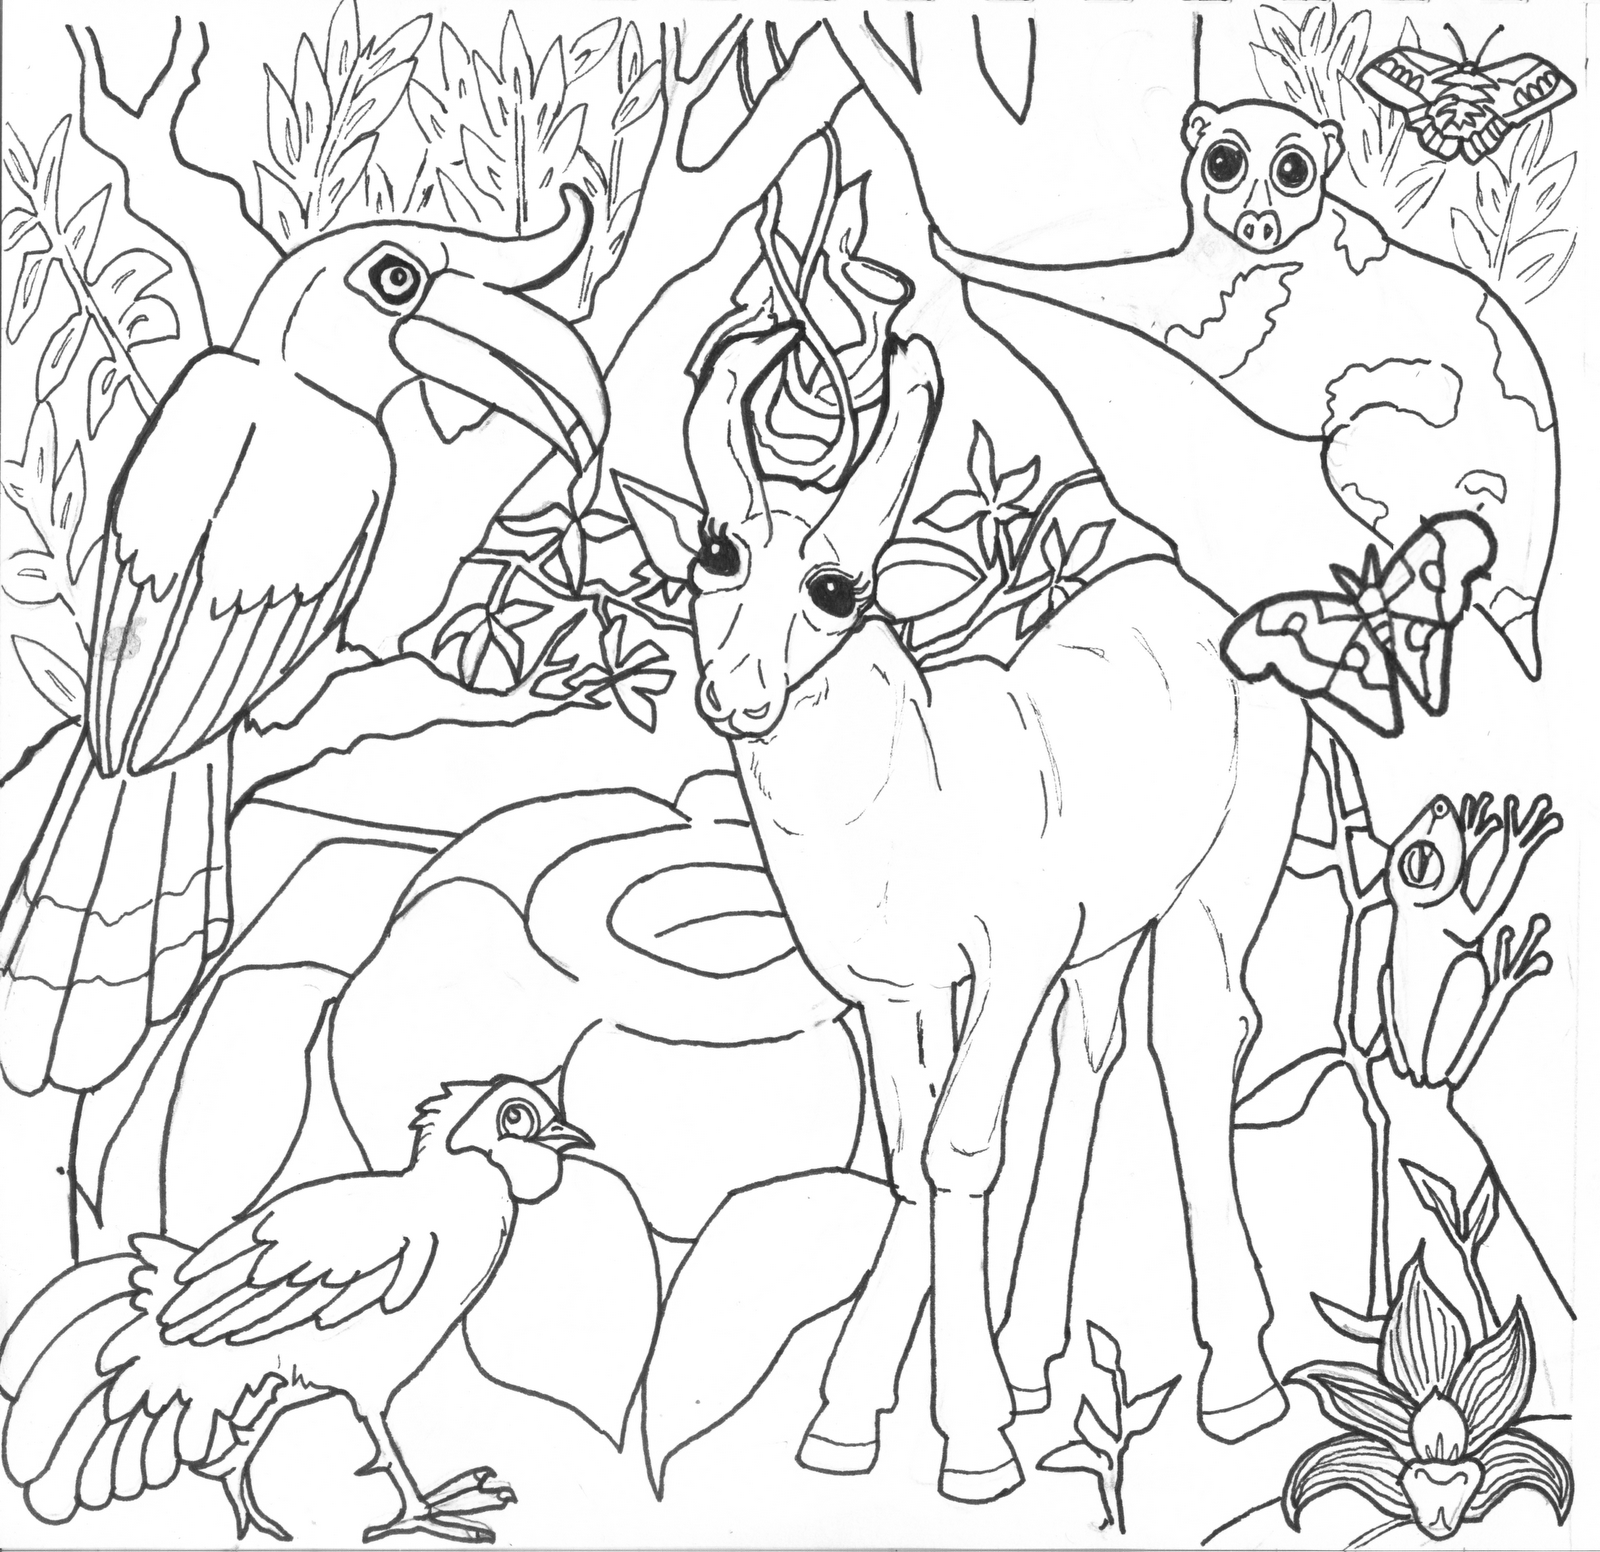 Rainforest coloring #4, Download drawings